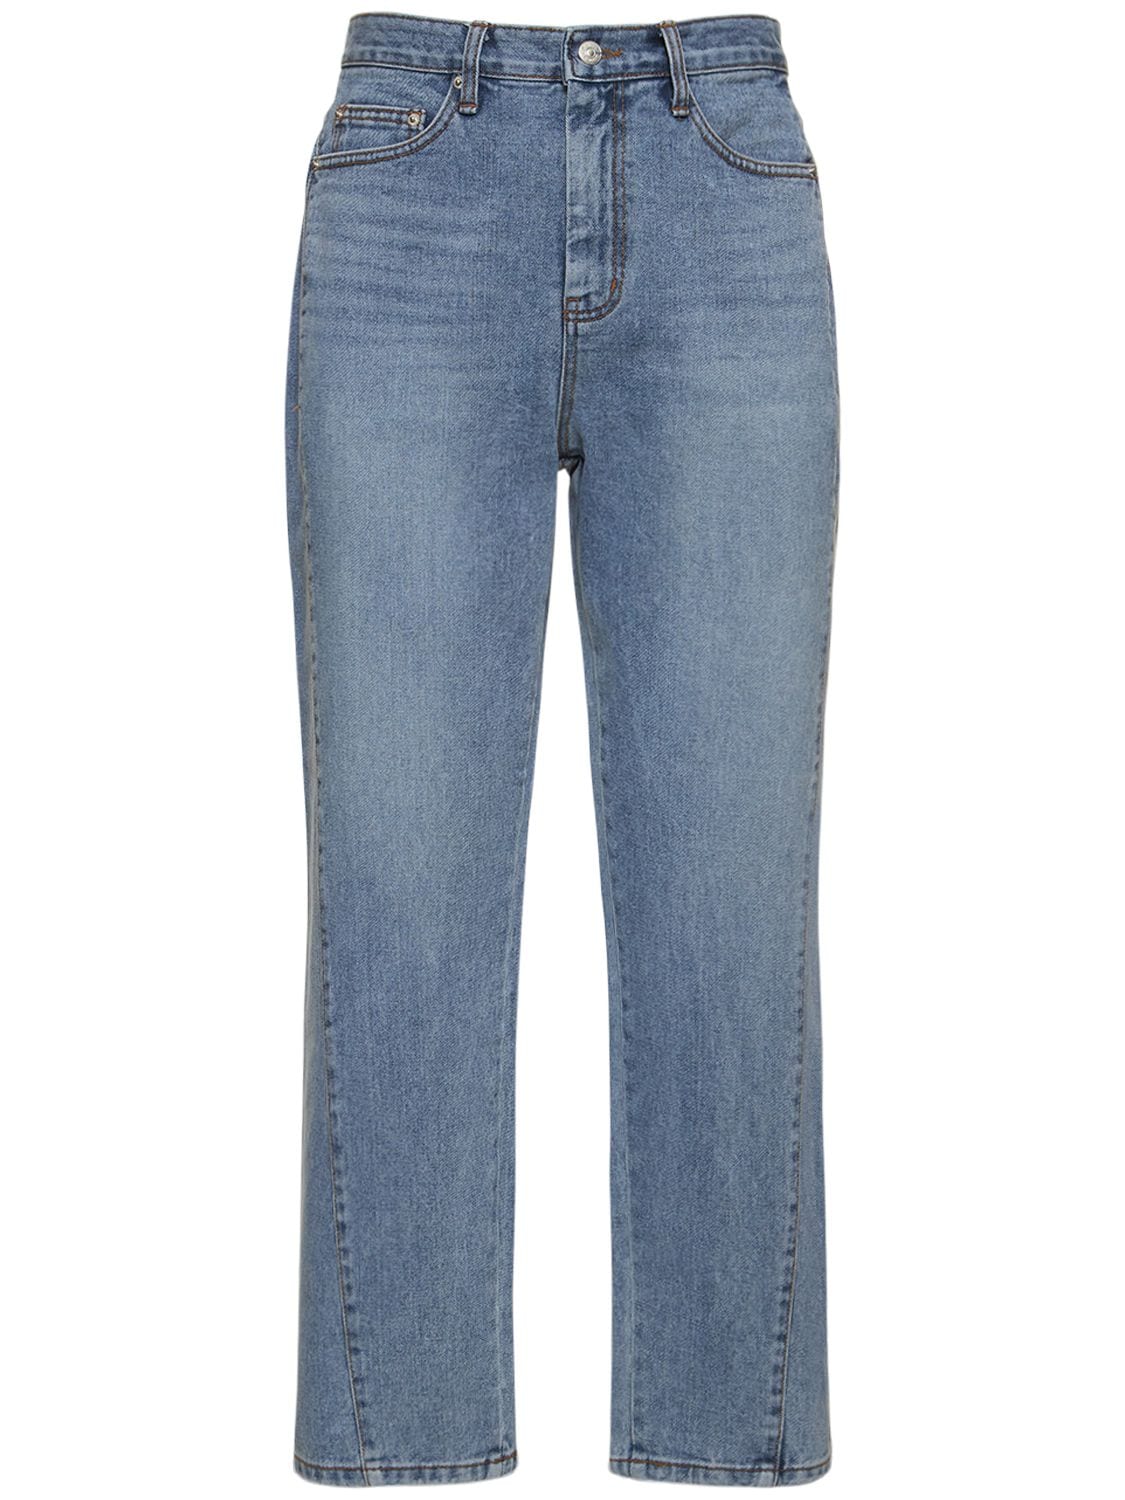 Curved Tapered Jeans – MEN > CLOTHING > JEANS